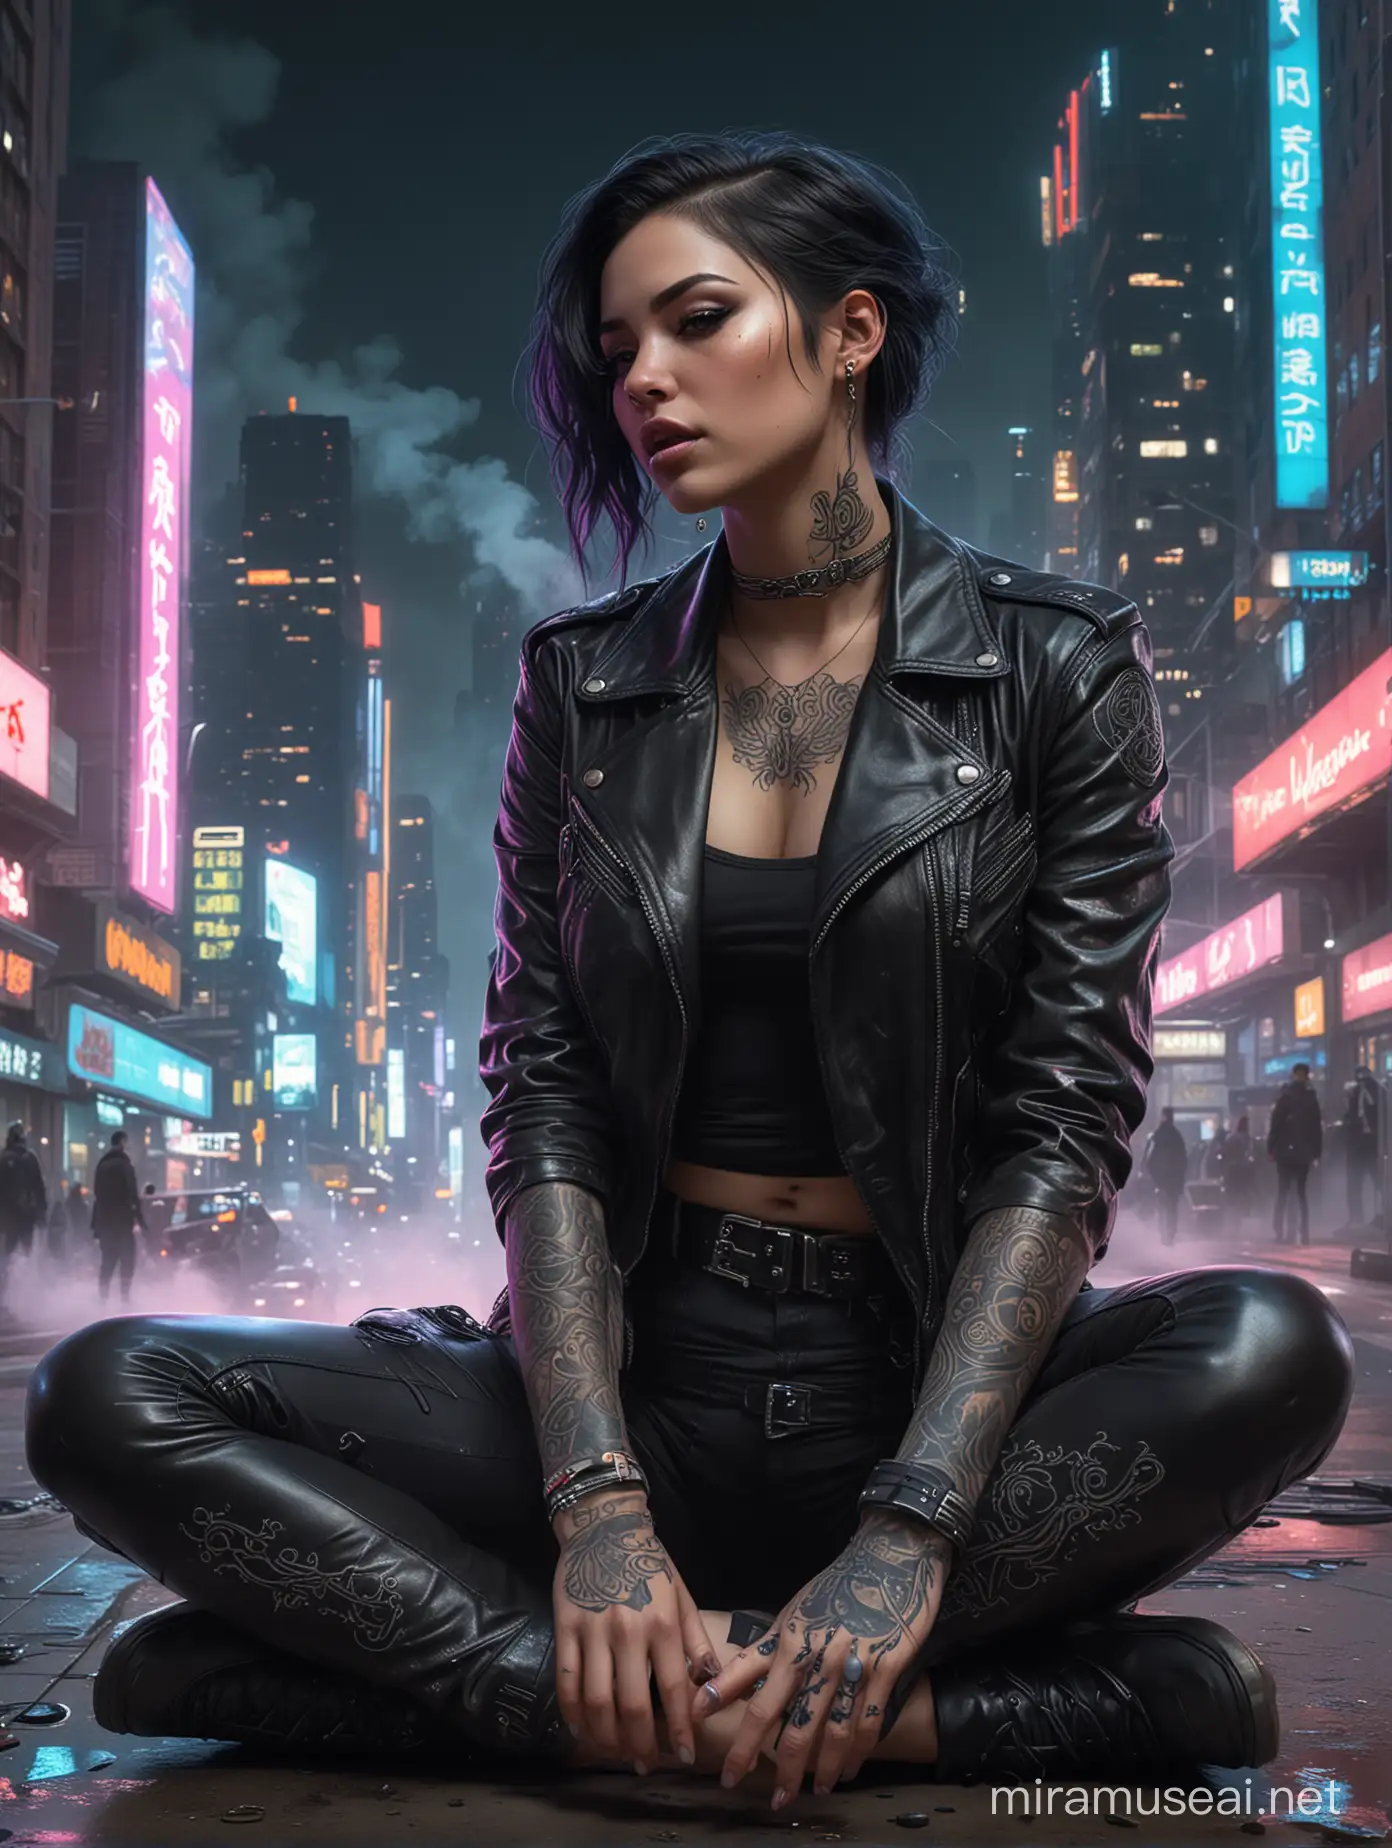 (A striking, cyberpunk-inspired painting of a gothic woman sitting on the ground. She wears a black leather jacket with intricate tattoos covering her arms, and her face is adorned with dark makeup. She casually smokes a cigarette, exhaling a trail of smoke in the air. The background reveals a neon-lit cityscape, with towering buildings and a futuristic highway. The painting is highly detailed, showcasing the artist's skill in capturing textures and light. It is a lowbrow masterpiece, created by the talented Ross Tran and shared on the CGSociety platform.